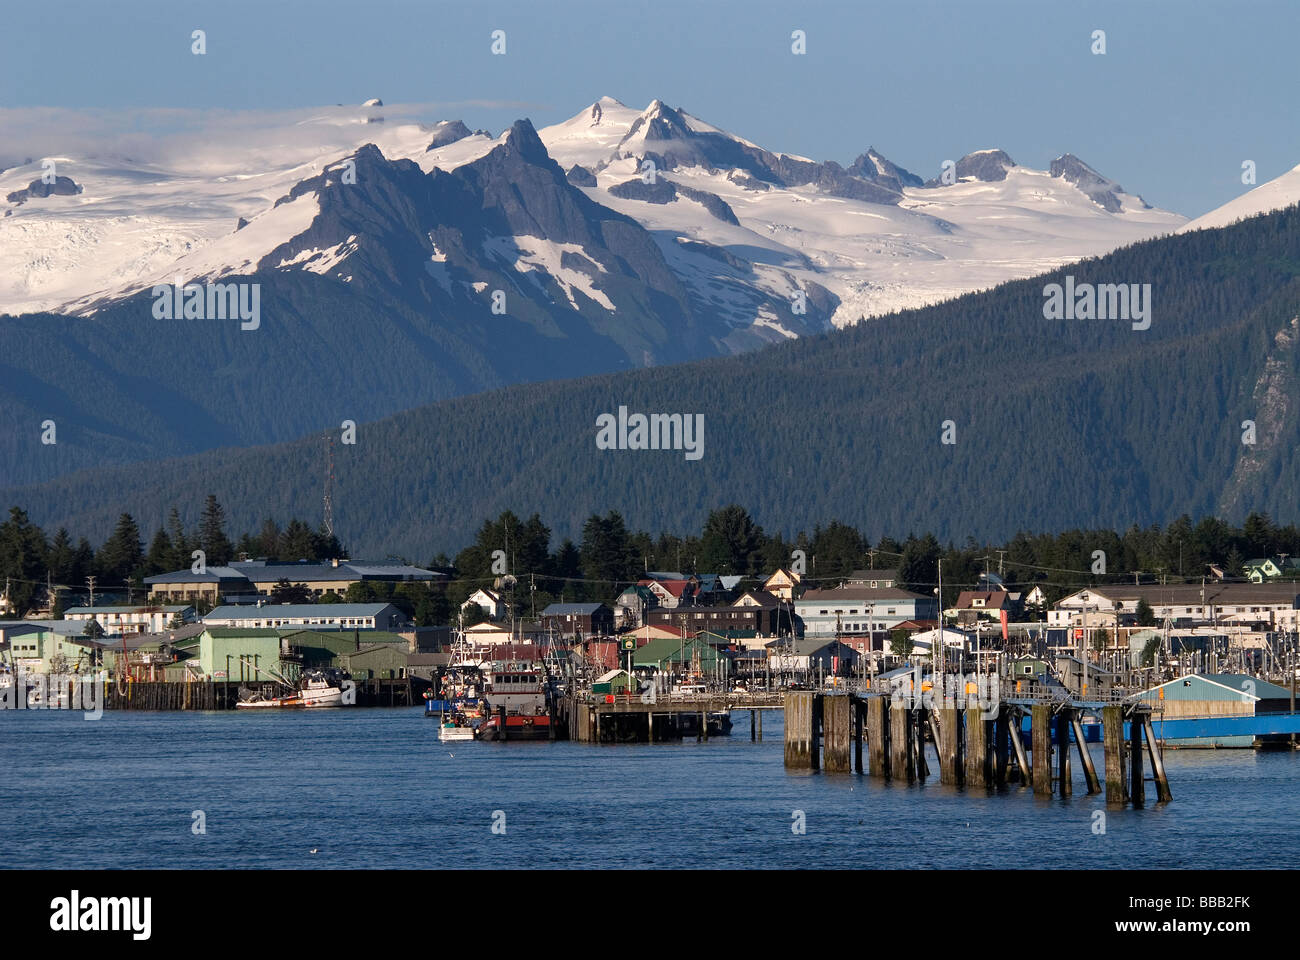 View of Petersburg and mountains from the M V Malaspina Petersburg Alaska USA Stock Photo